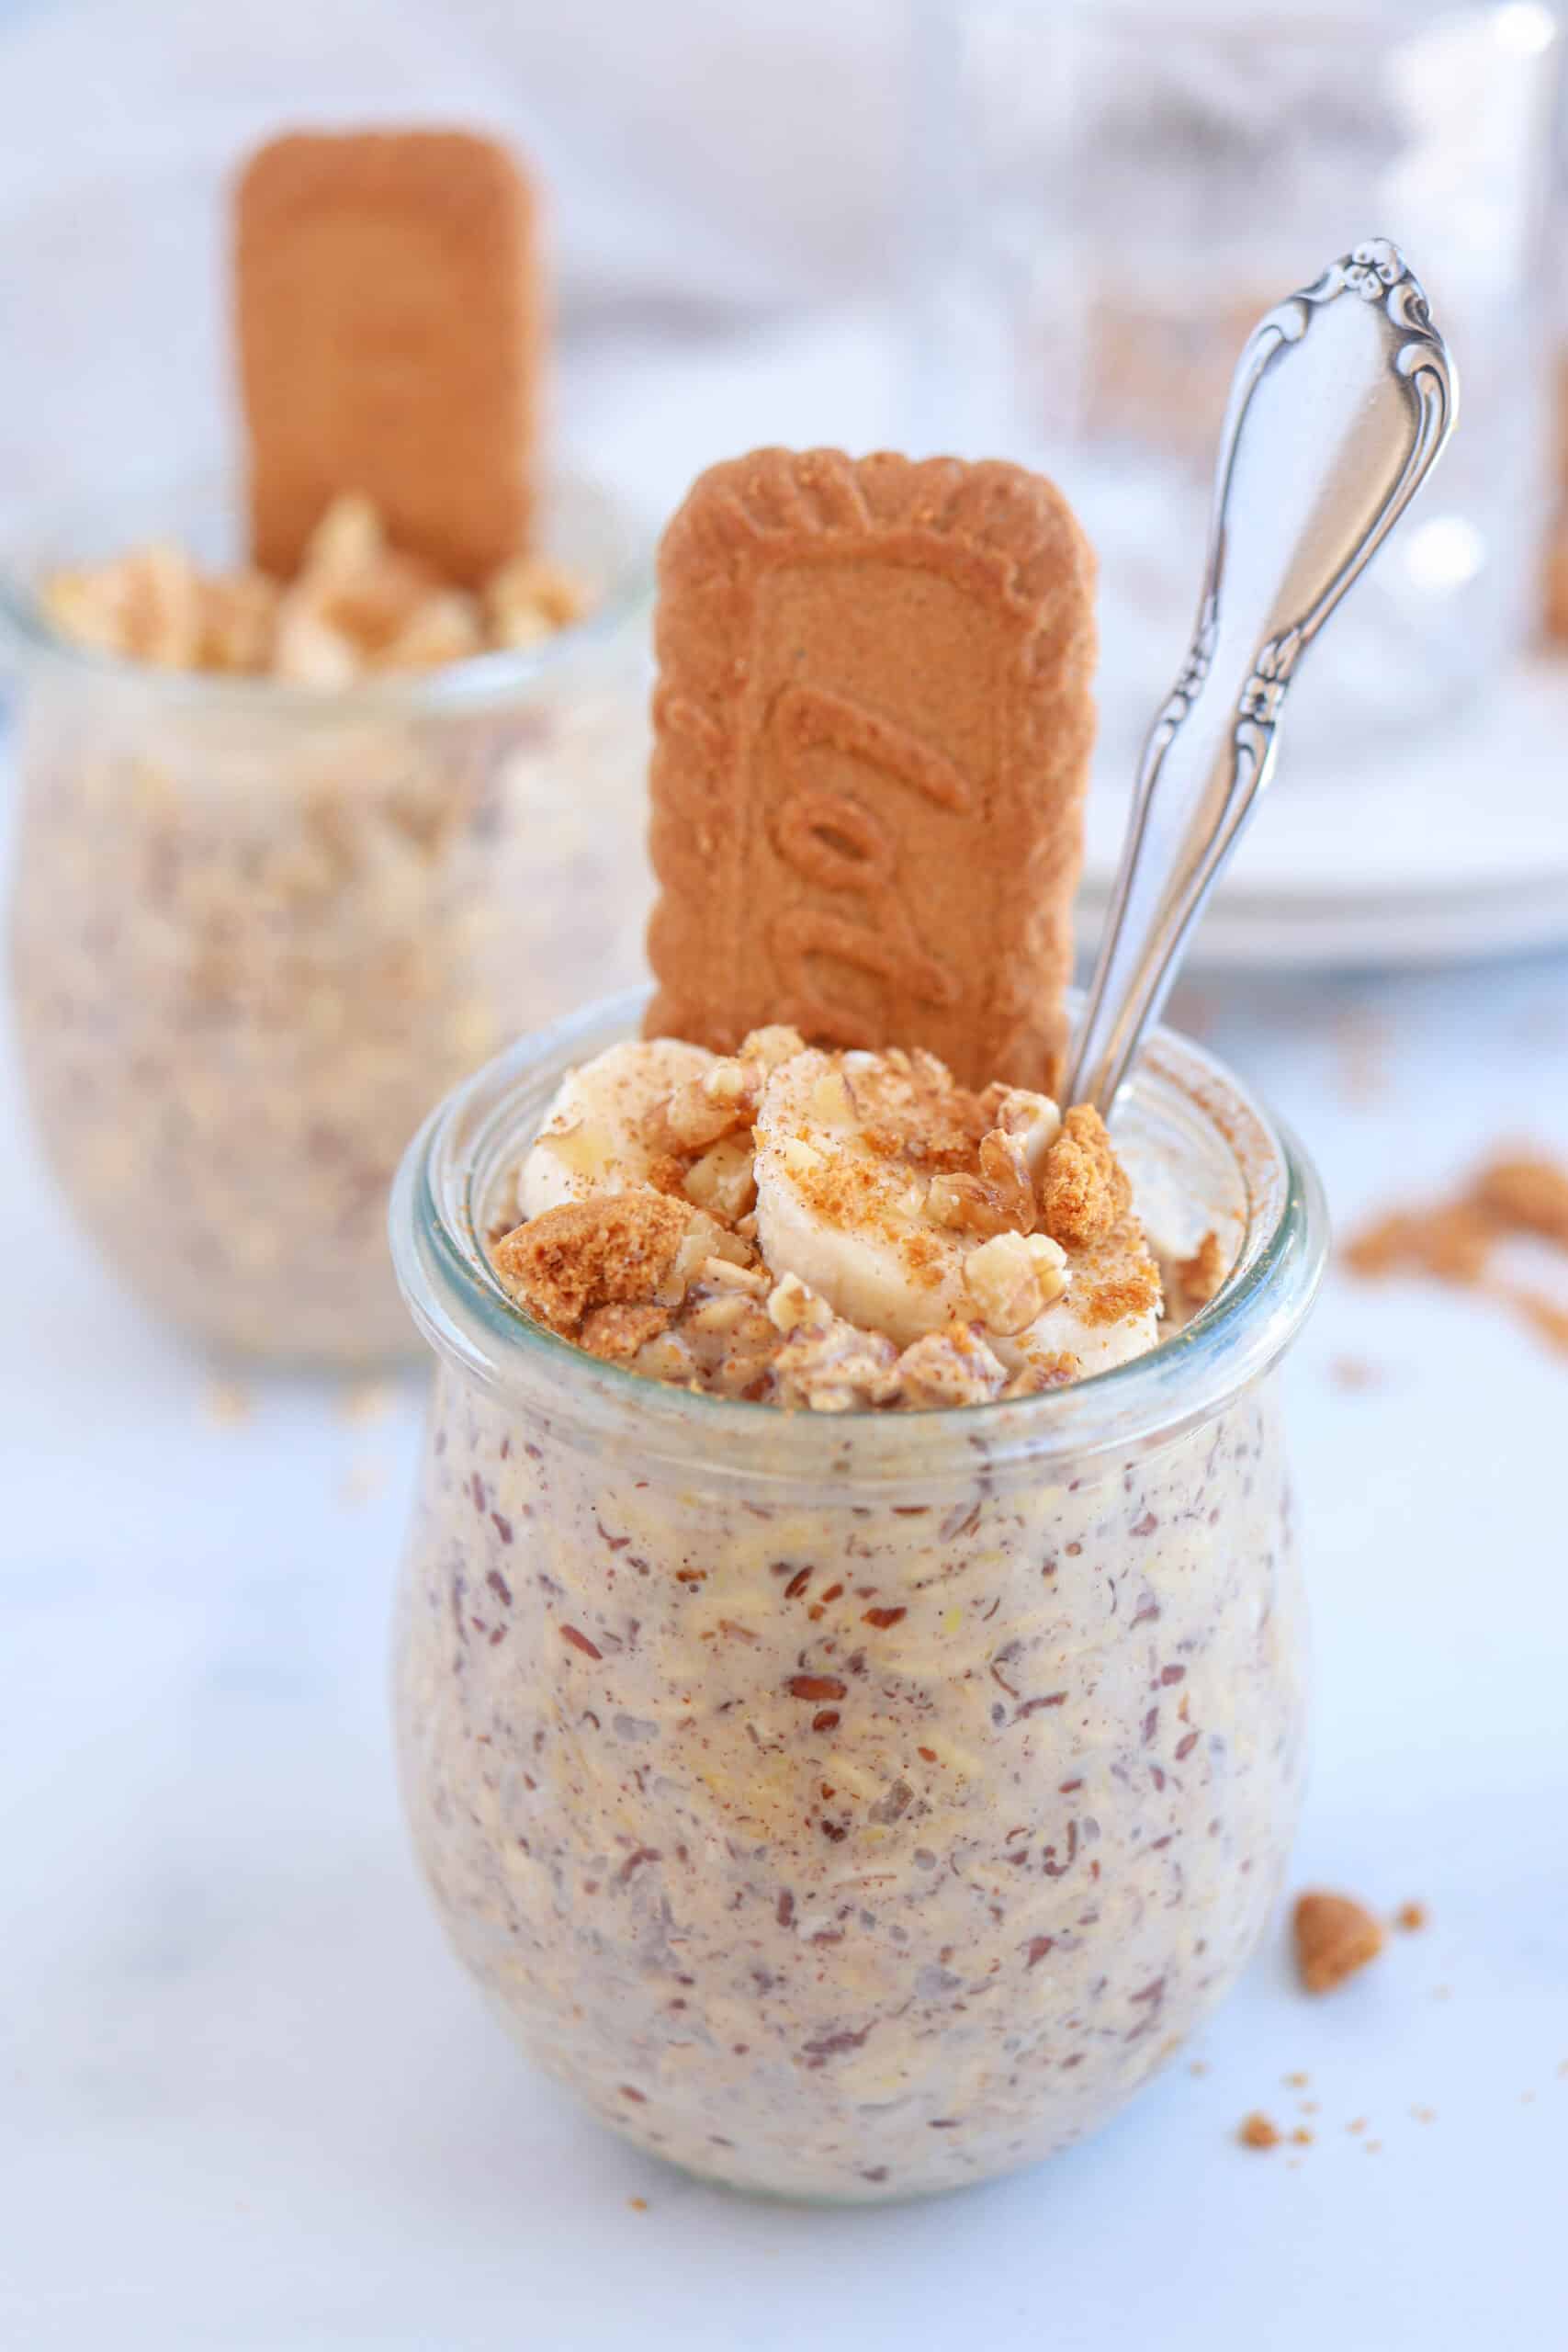 biscoff overnight oats in a tulip jar topped with sliced banana, walnuts and crushed biscoff cookies.